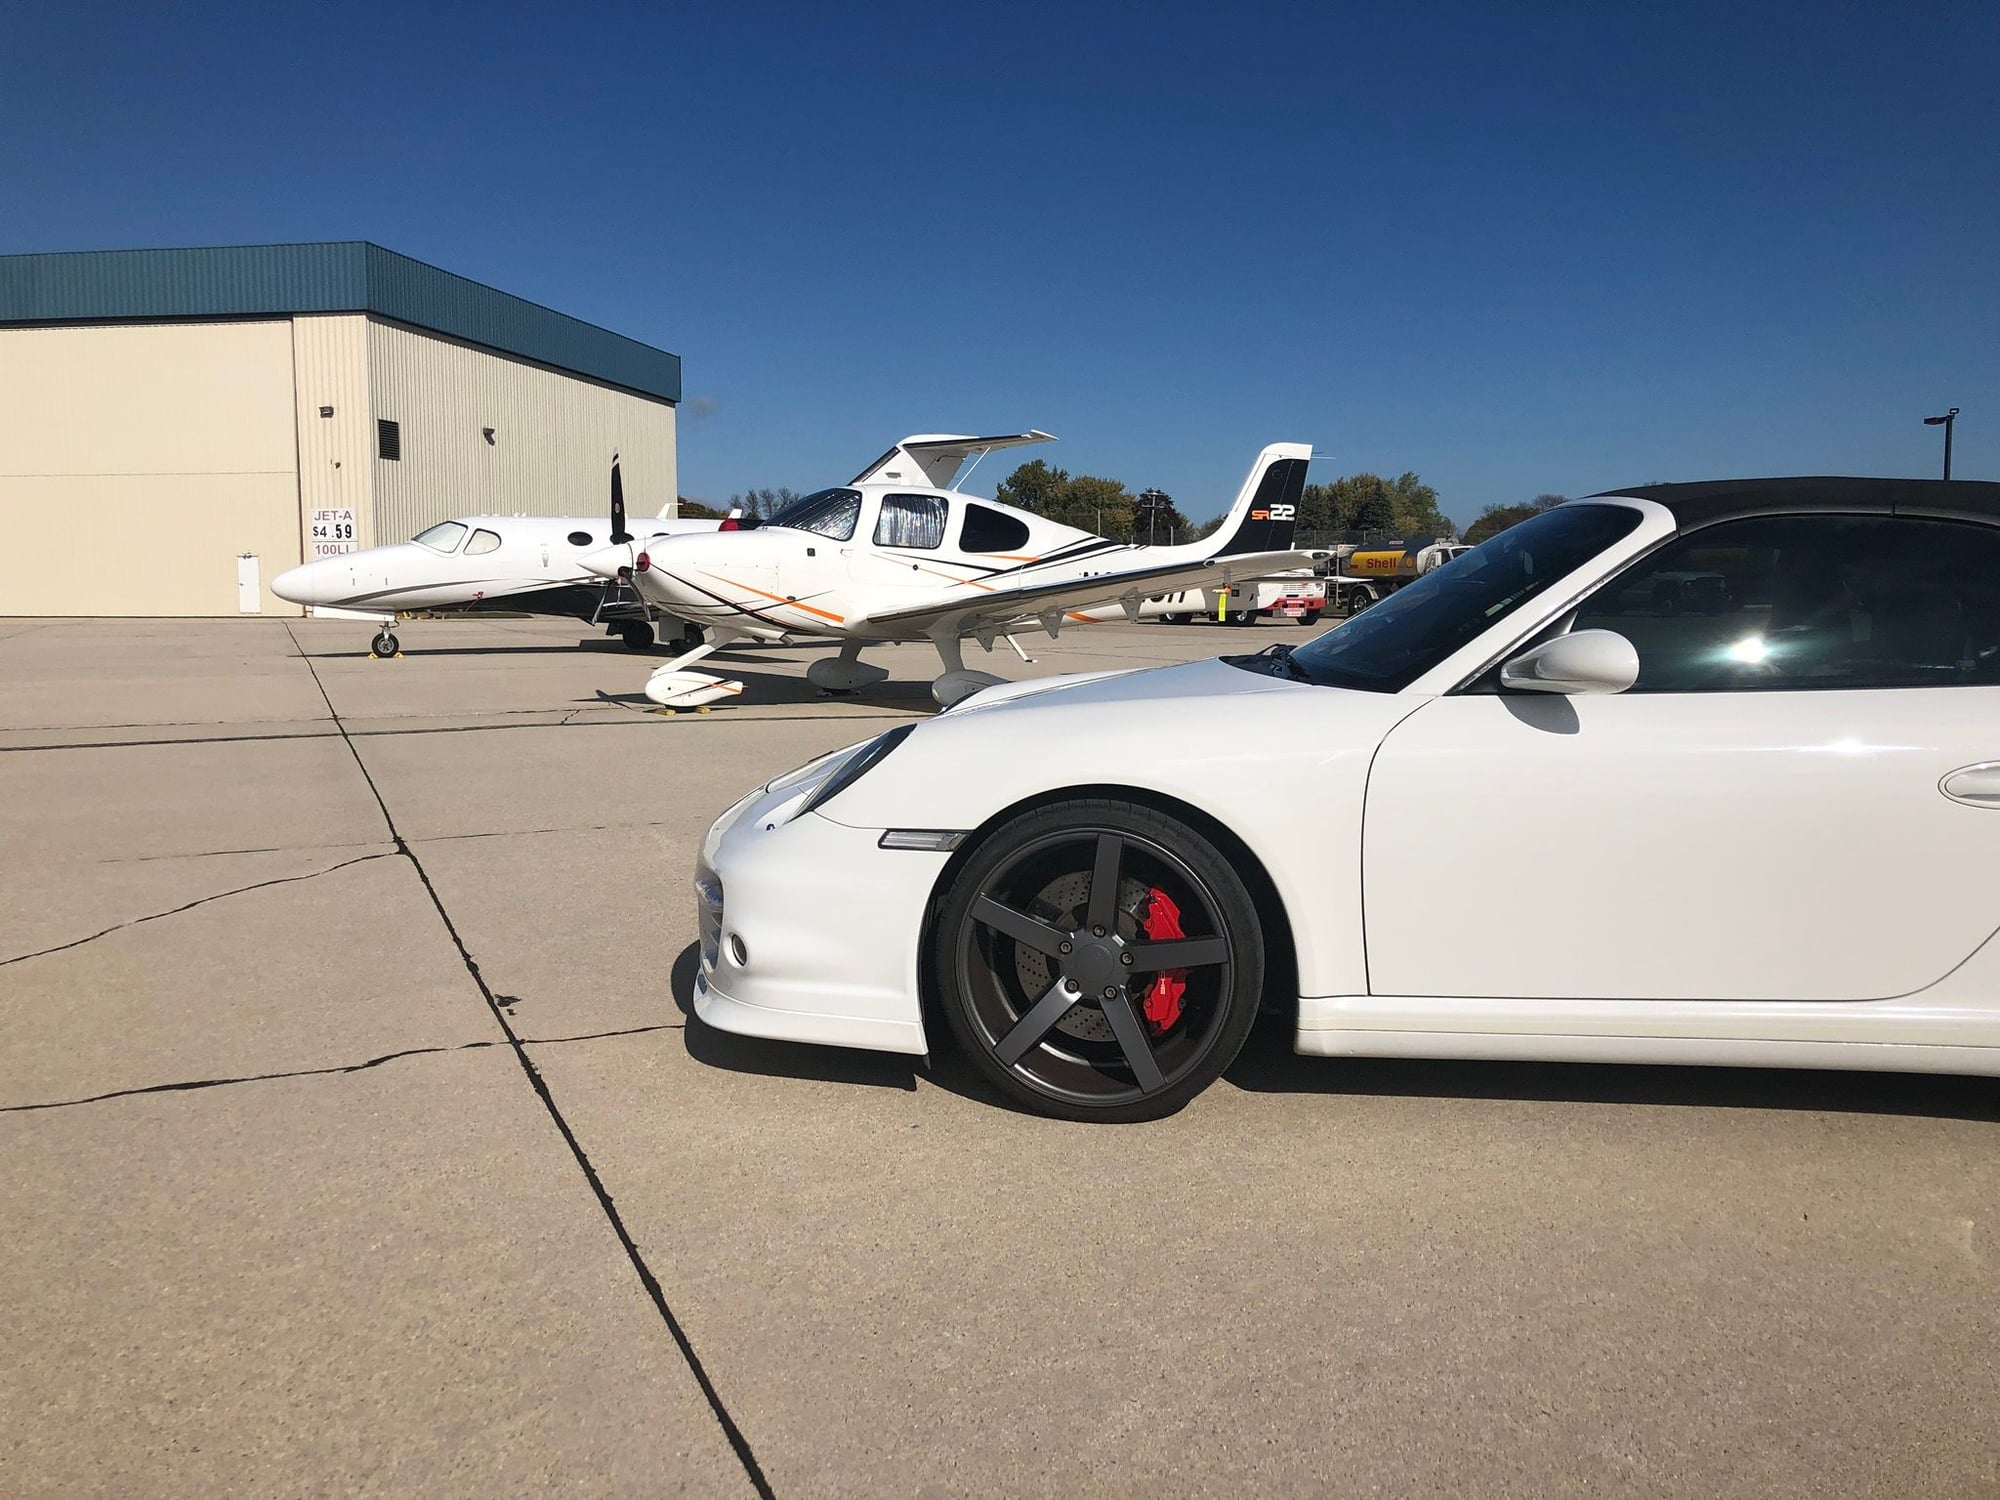 2009 Porsche 911 - 2009 911 Turbo Cab, manual, very high spec, last of the Metzger - Used - VIN WP0CD29949S773151 - 24,600 Miles - 6 cyl - AWD - Manual - Convertible - White - Oshkosh, WI 54901, United States